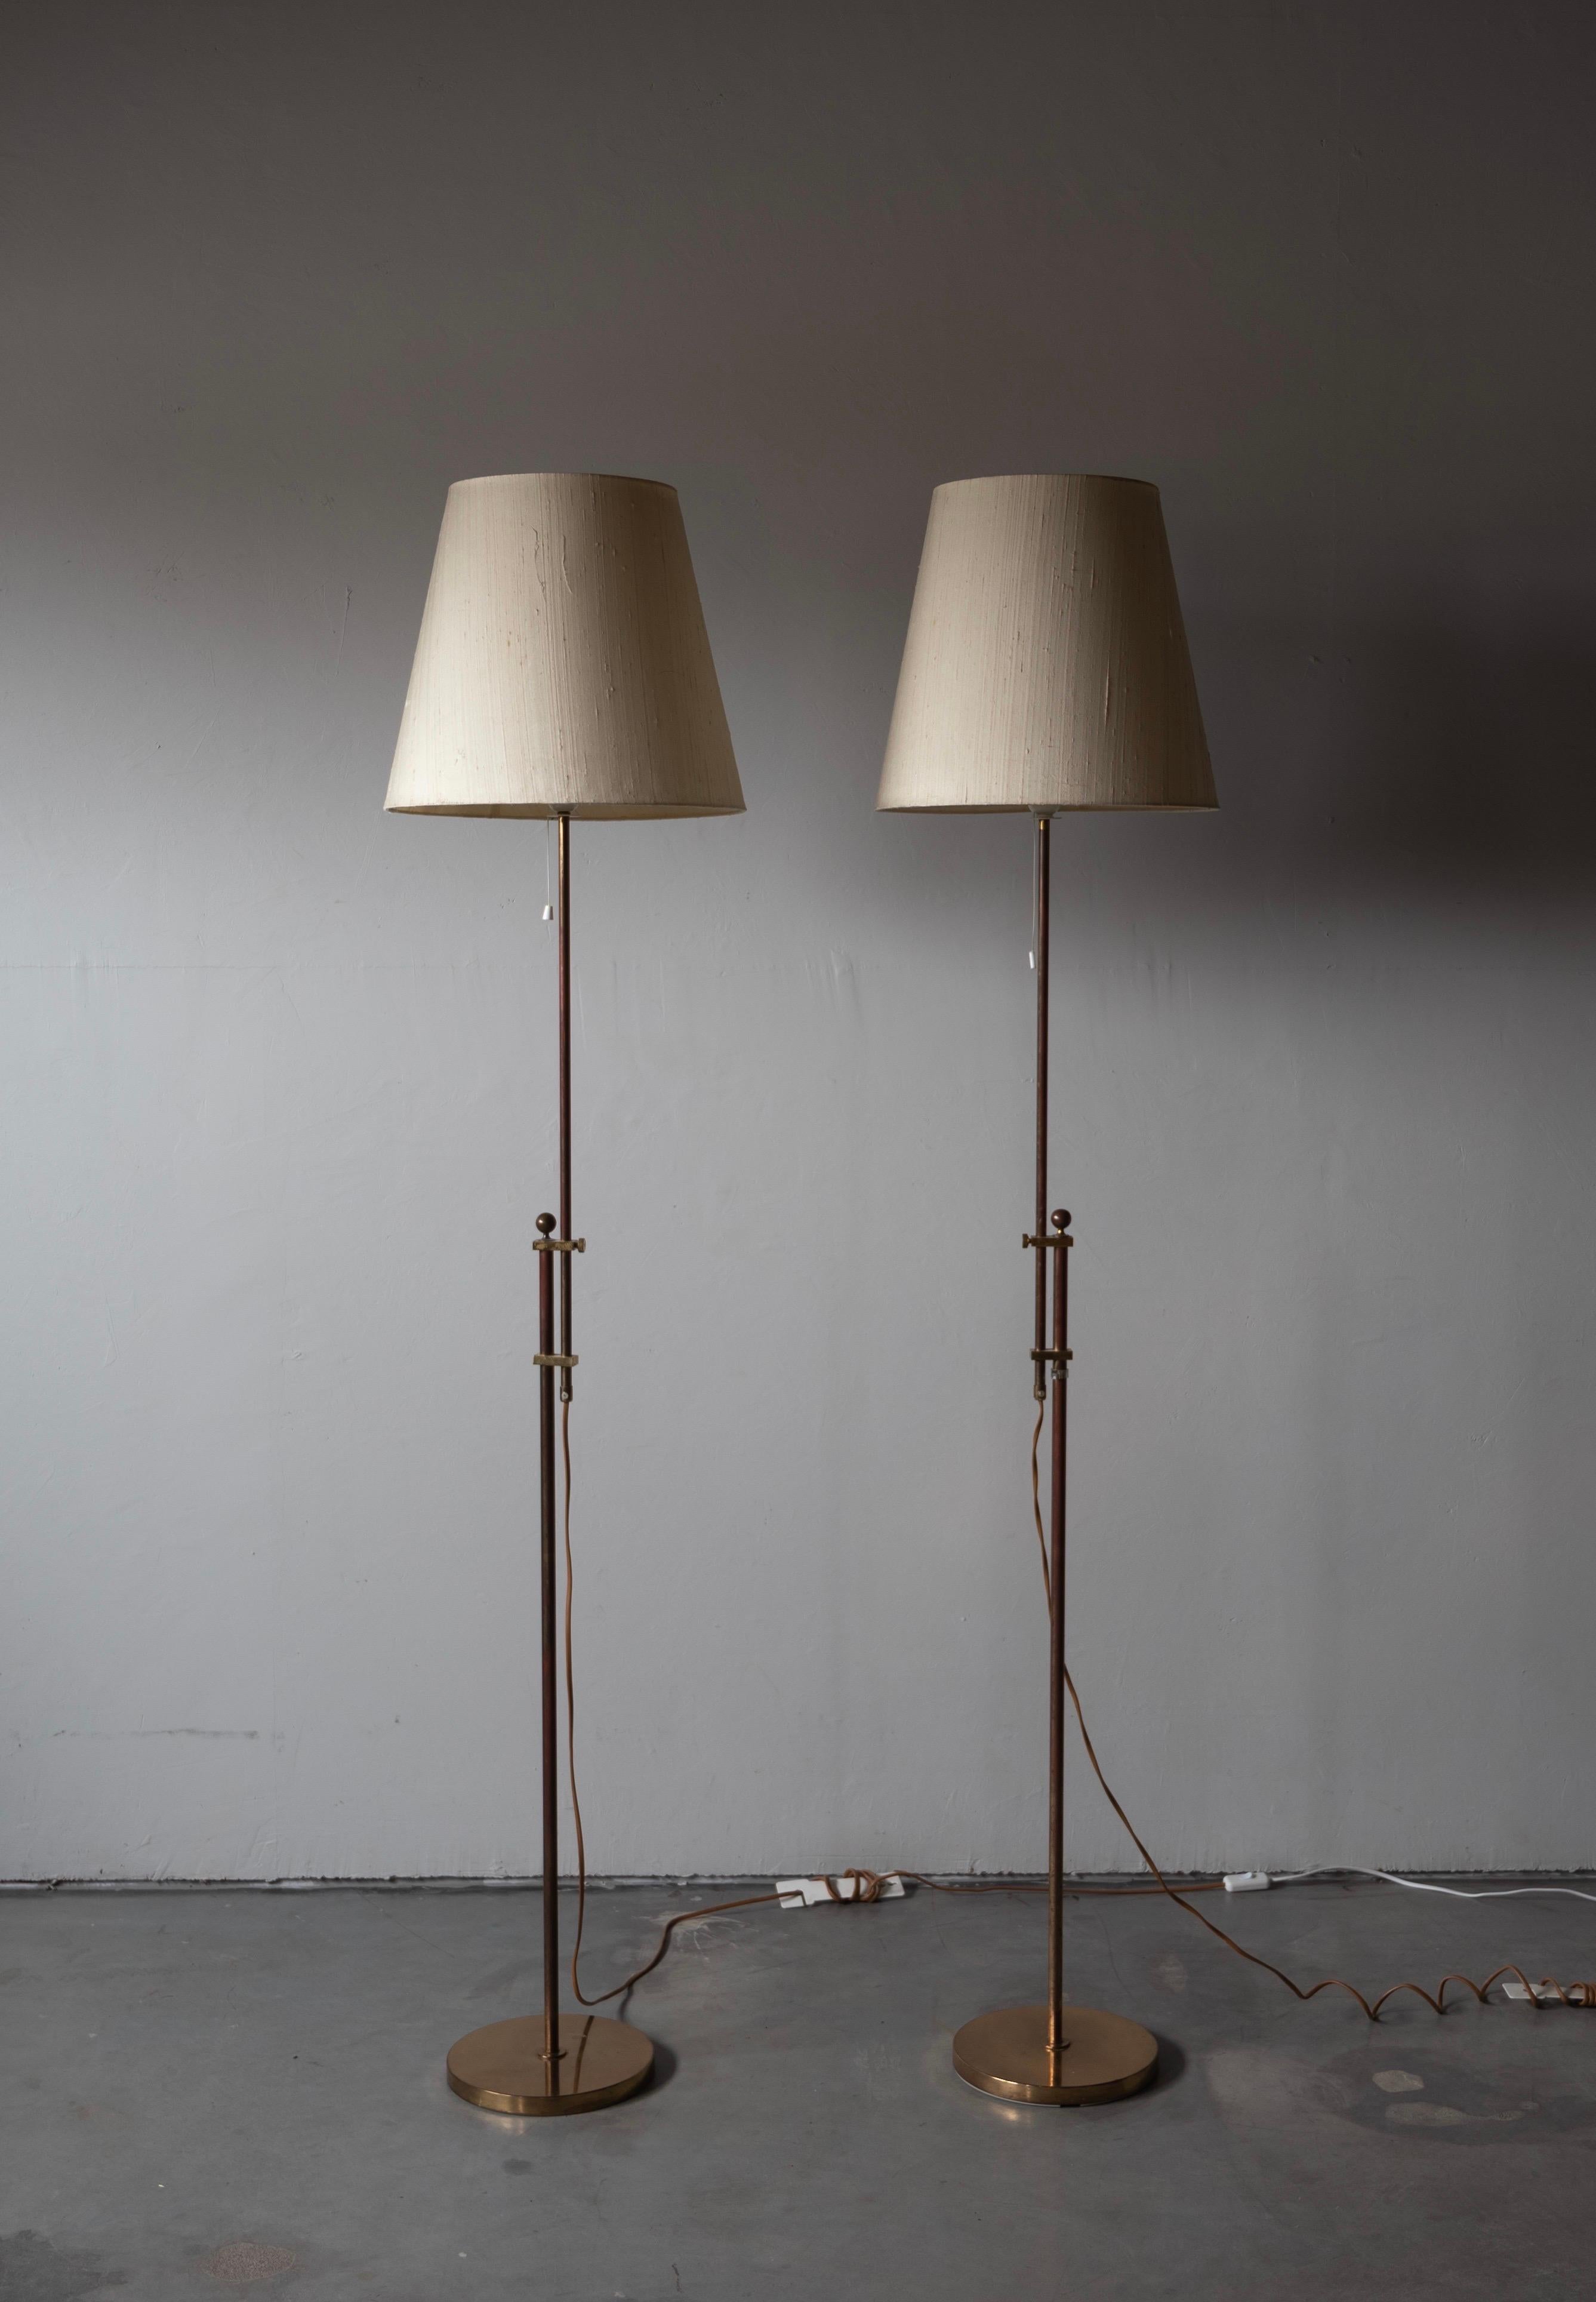 A pair of adjustable floor lamps. Designed and produced by Bergboms, Sweden, c. 1960s. Original fabric lampshades in fair condition.

Other designers of the period include Paavo Tynell, Hans Bergström, Josef Frank, and Kaare Klint.